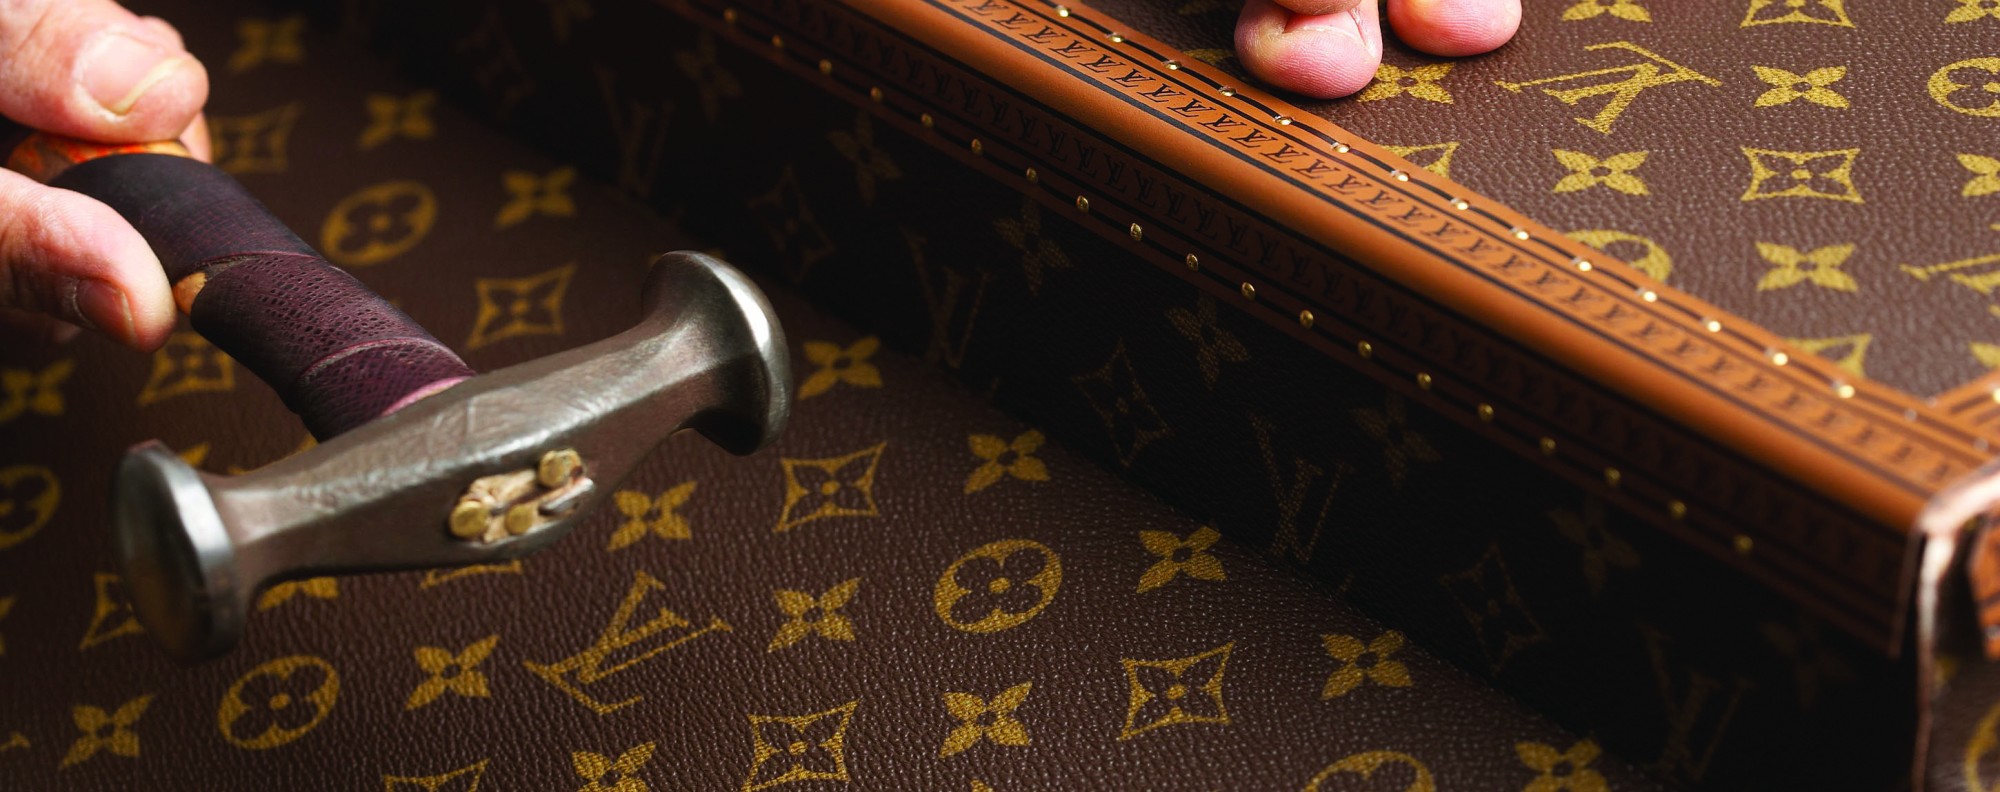 How Louis Vuitton's iconic trunk is | China Morning Post